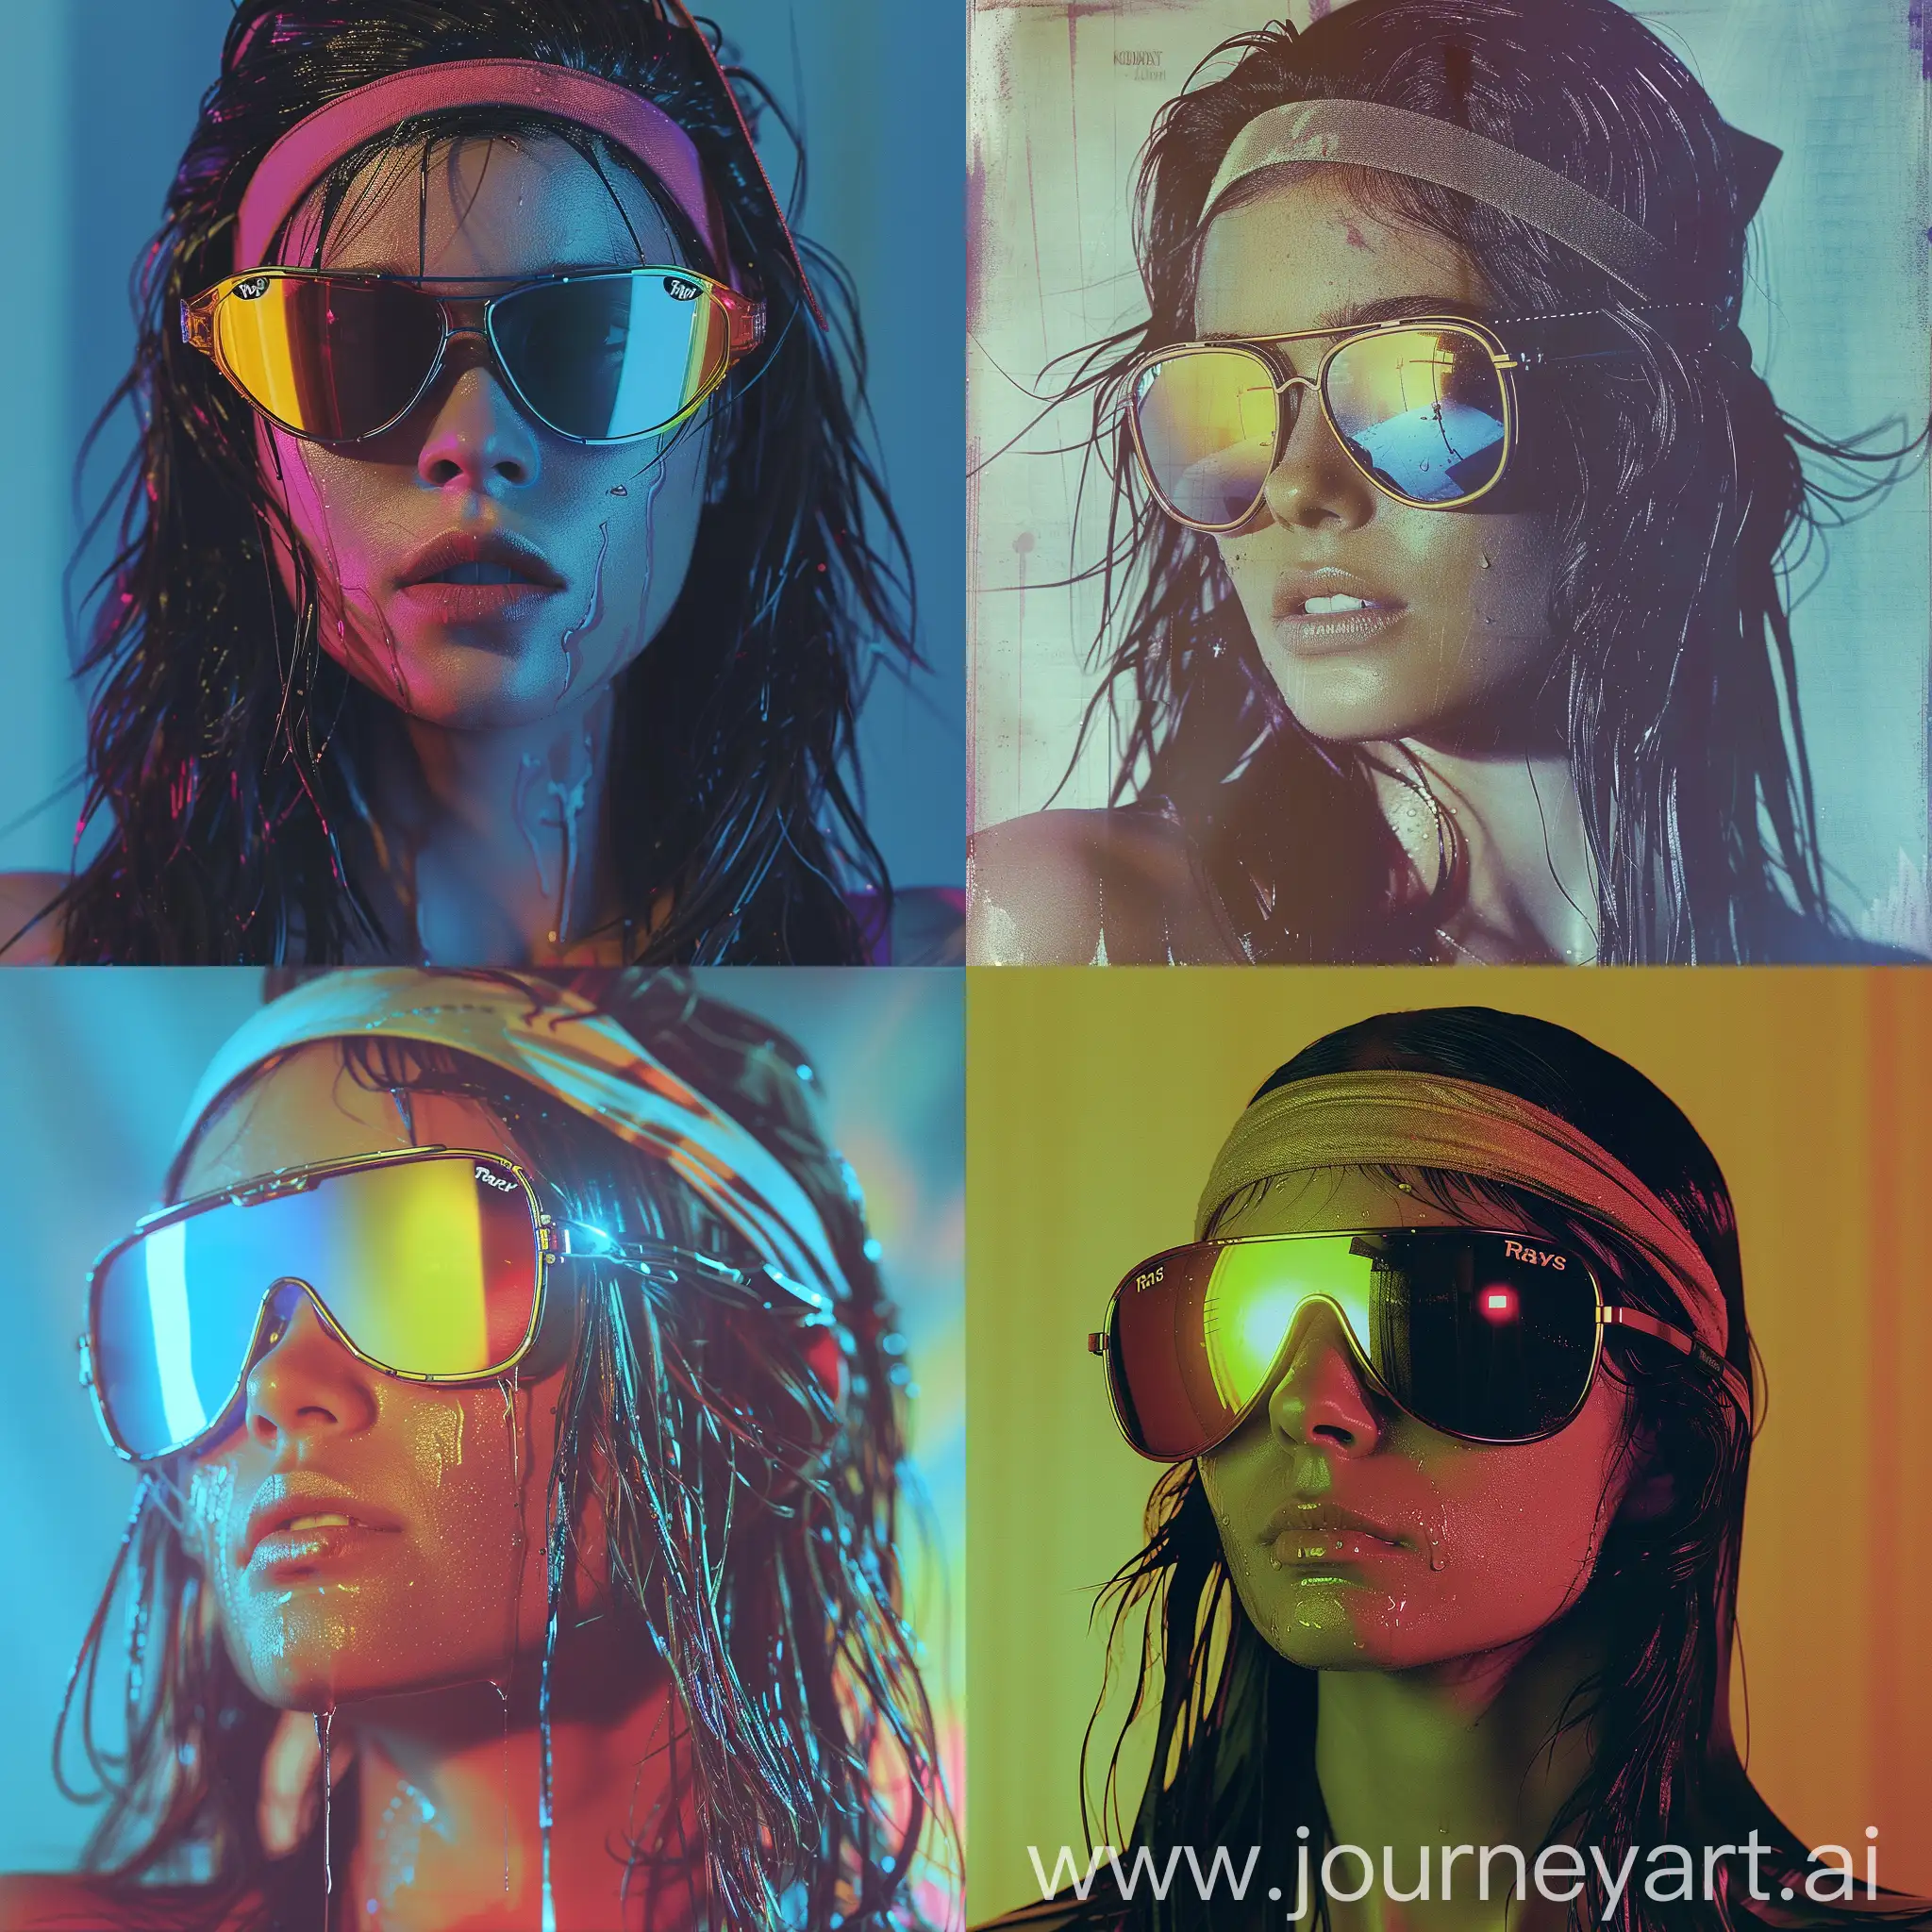 Generate a full portrait of a girl wearing ray ban or Vaurnet reflective sunglasses and a head band, reminiscent of iconic 1980s movie posters. The girl's expression should be confident and stylish, evoking the spirit of the era. Pay attention to the composition, lighting, and color palette to capture the essence of classic 1980s cinematography. Emphasize the bold and vibrant aesthetic typical of the era's movie posters, while also ensuring a timeless and iconic quality to the image.  Hair should be long wet and straight.  Using a kodak vintage film photo look.